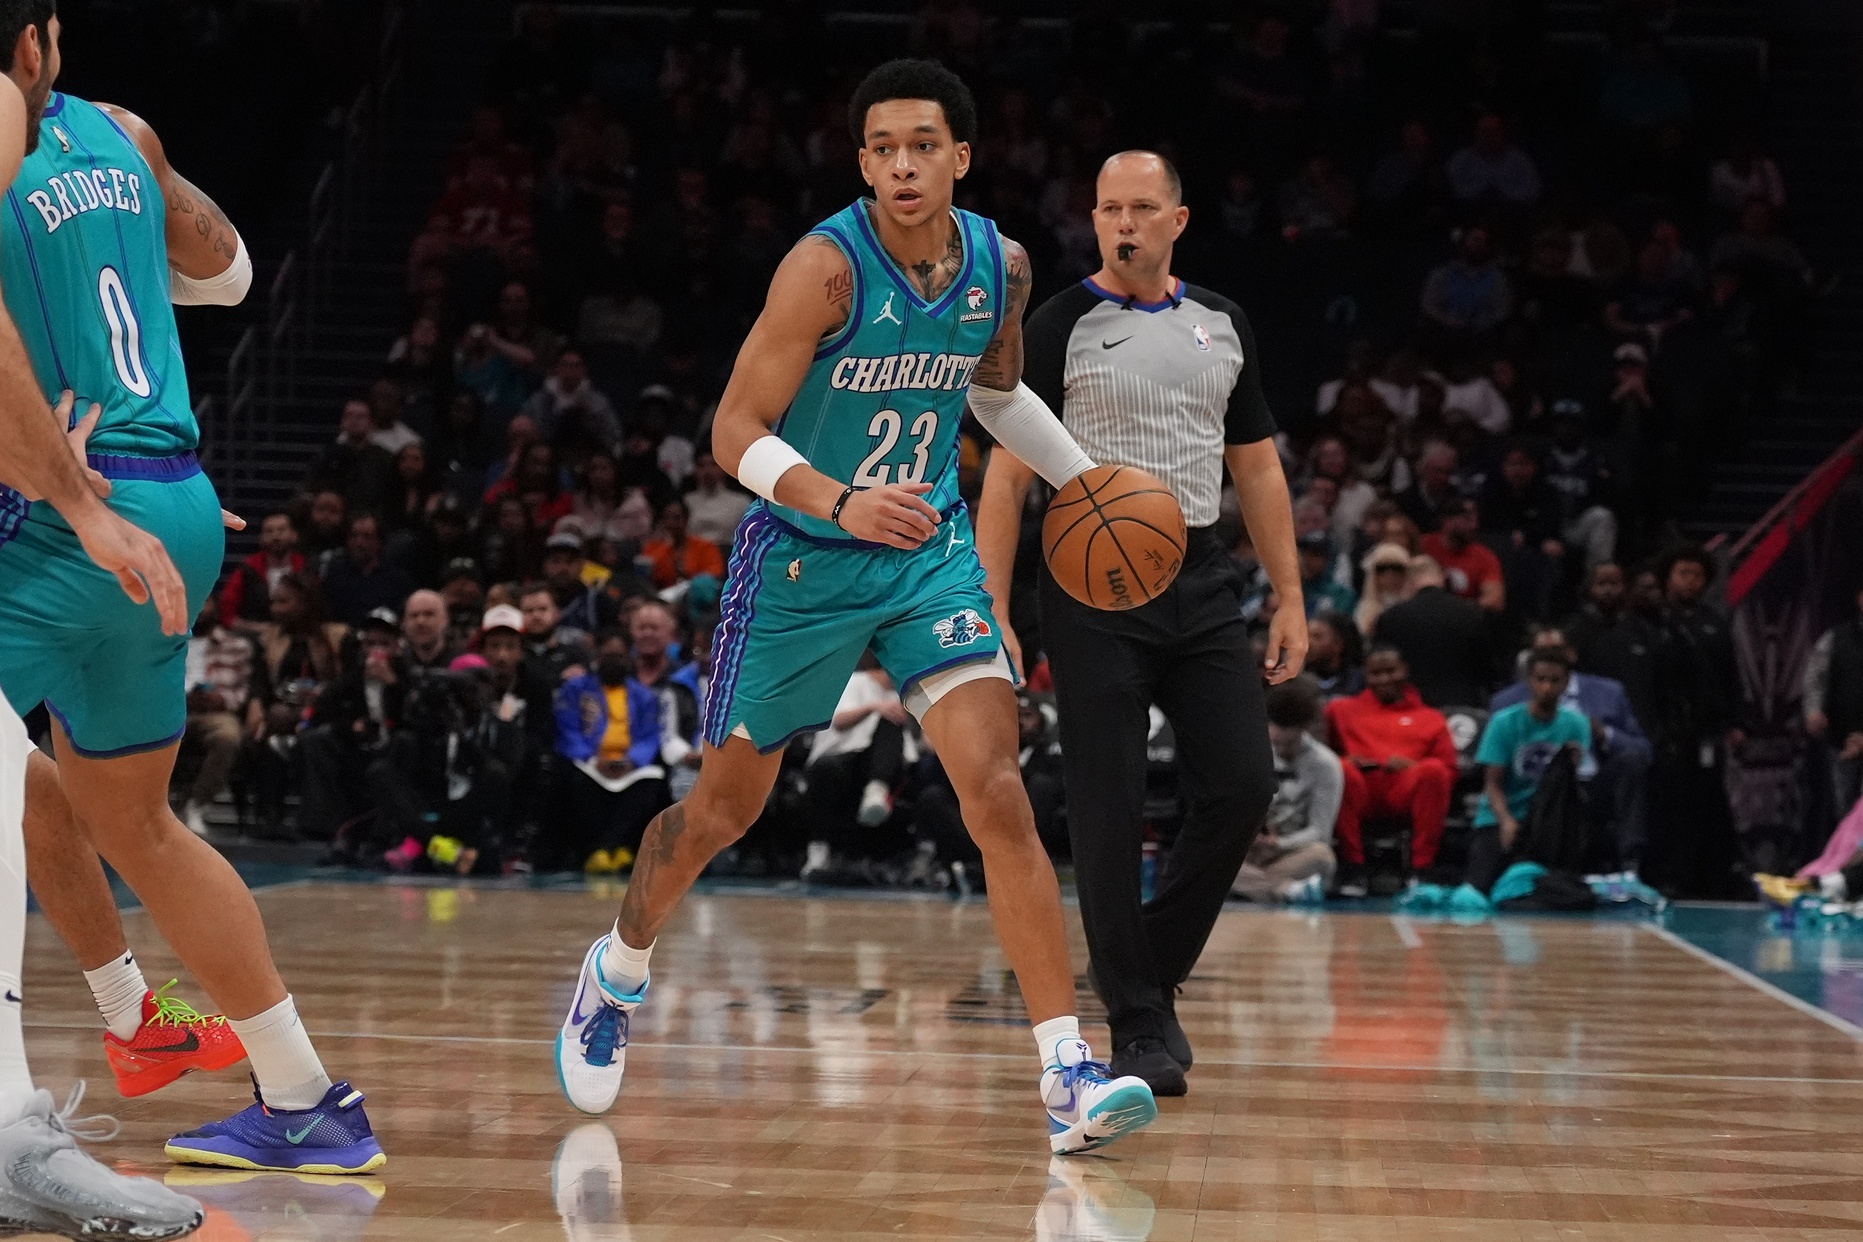 Charlotte Hornets guard Tre Mann (23) handles the ball against the Memphis Grizzlies during the first quarter at Spectrum Center.